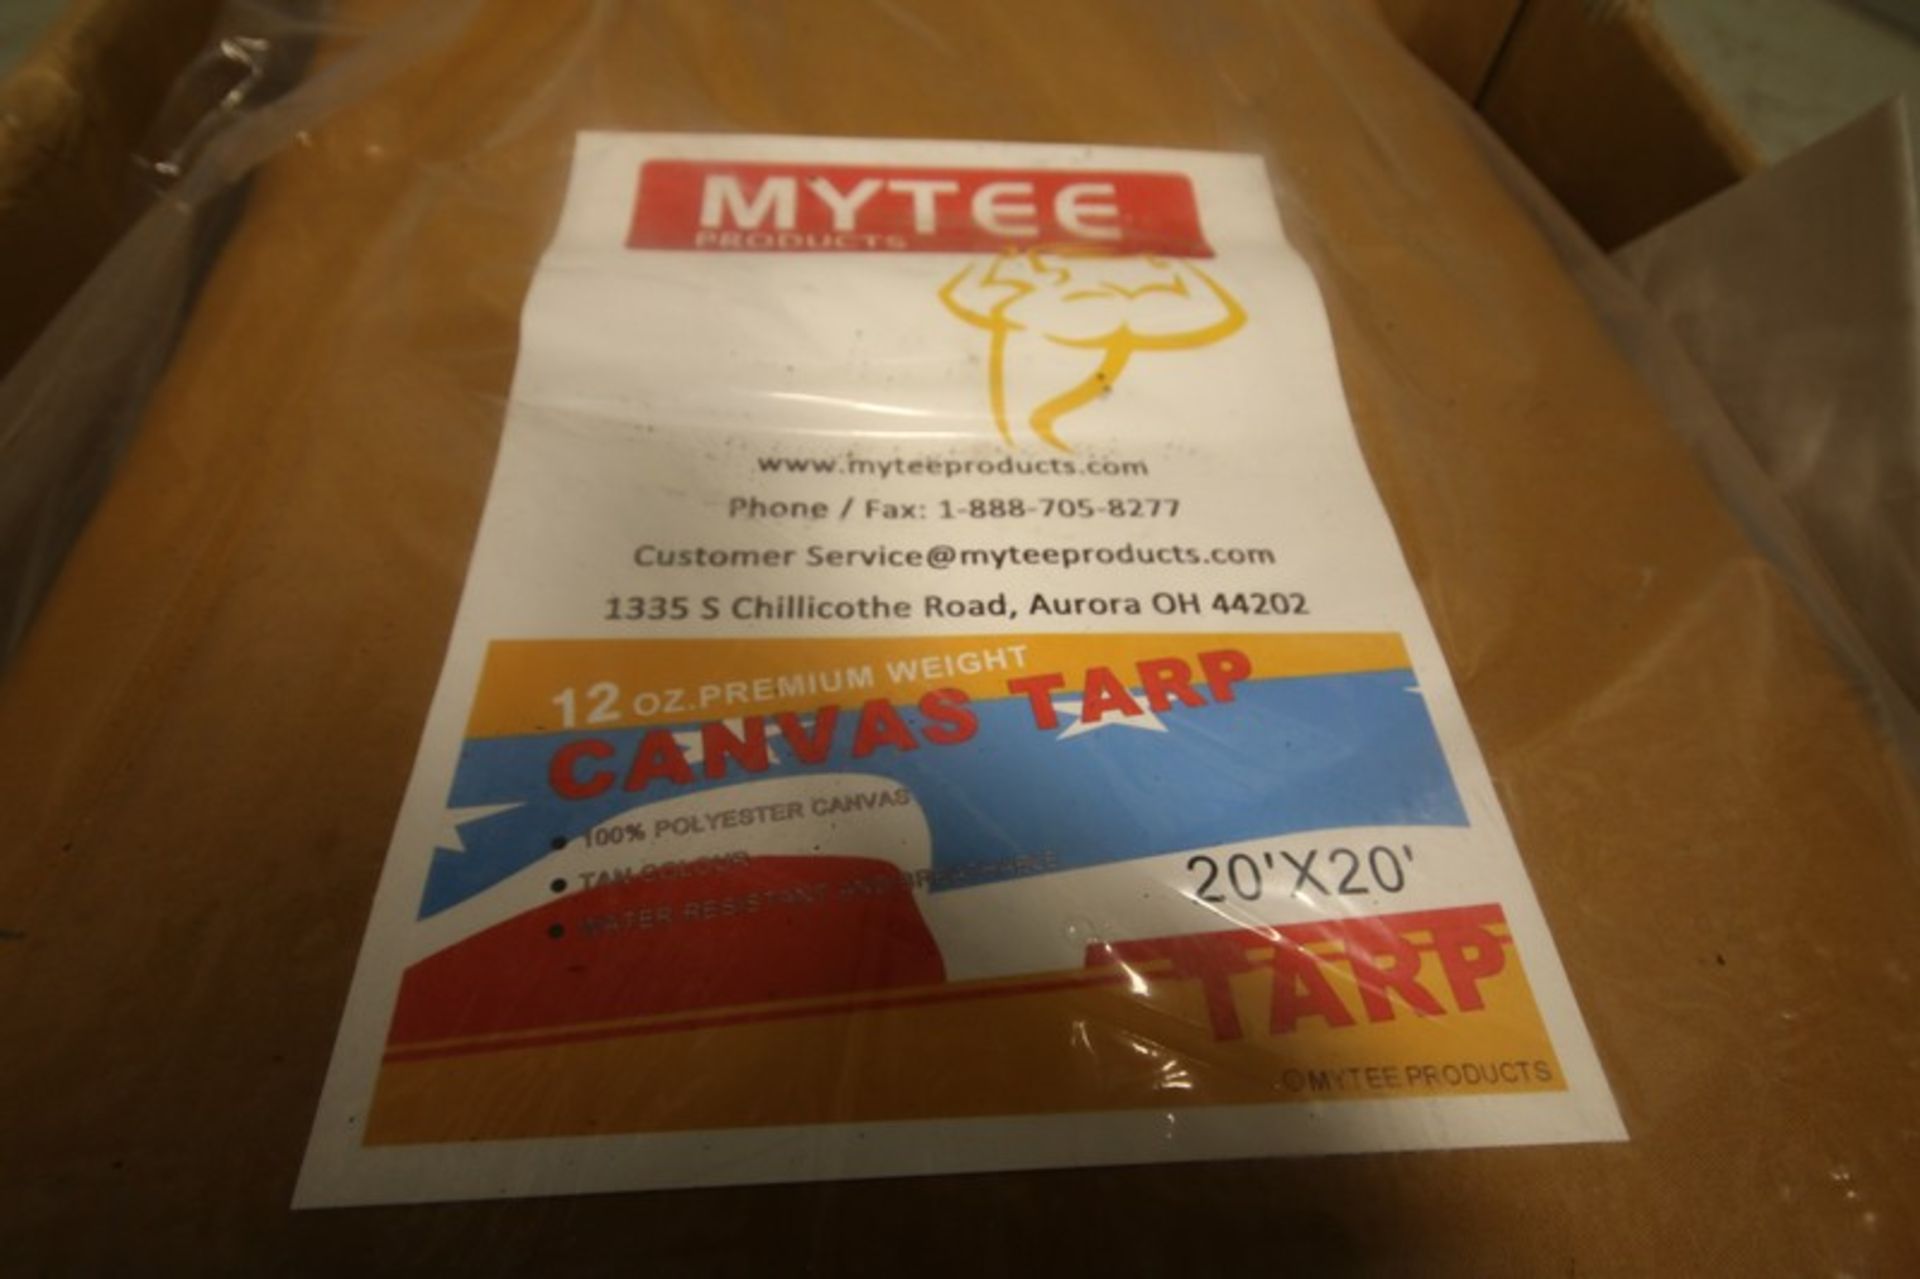 Mytee 20 x 20 New Canvas Tarp, 12 oz Weight, Order #VC484D (INV#66959) (Located @ the MDG Auction - Bild 3 aus 4